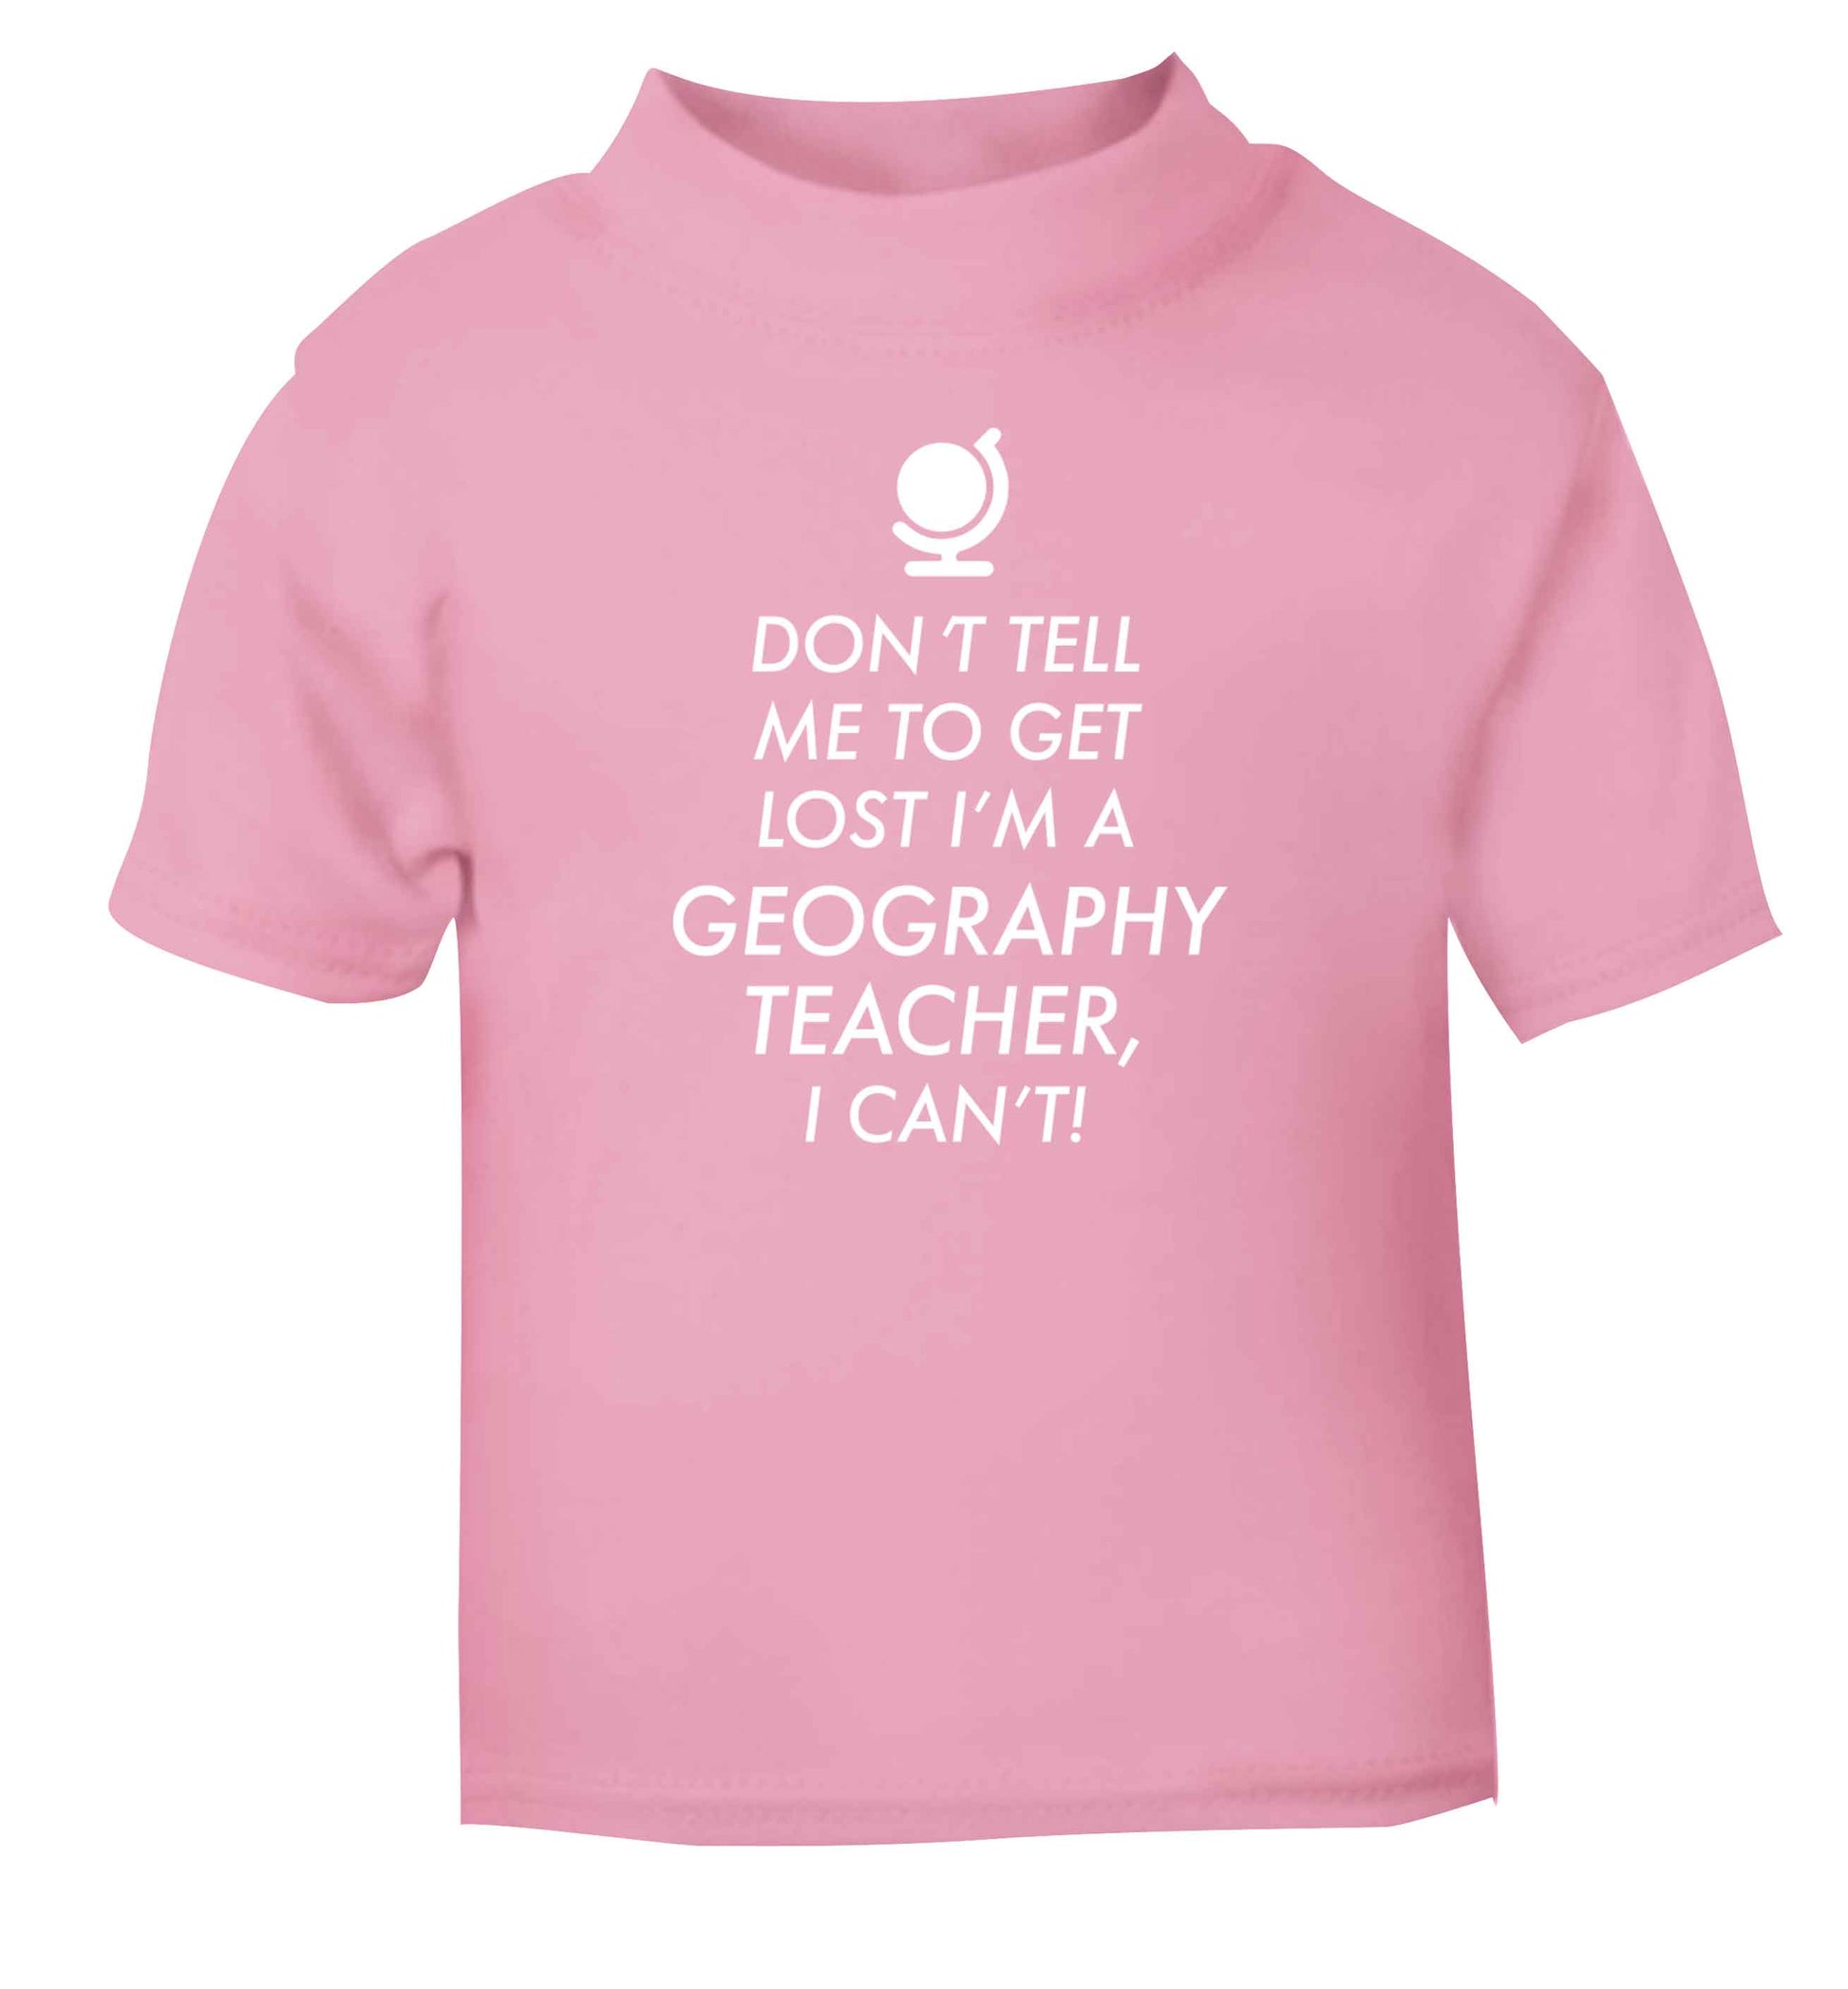 Don't tell me to get lost I'm a geography teacher, I can't light pink Baby Toddler Tshirt 2 Years